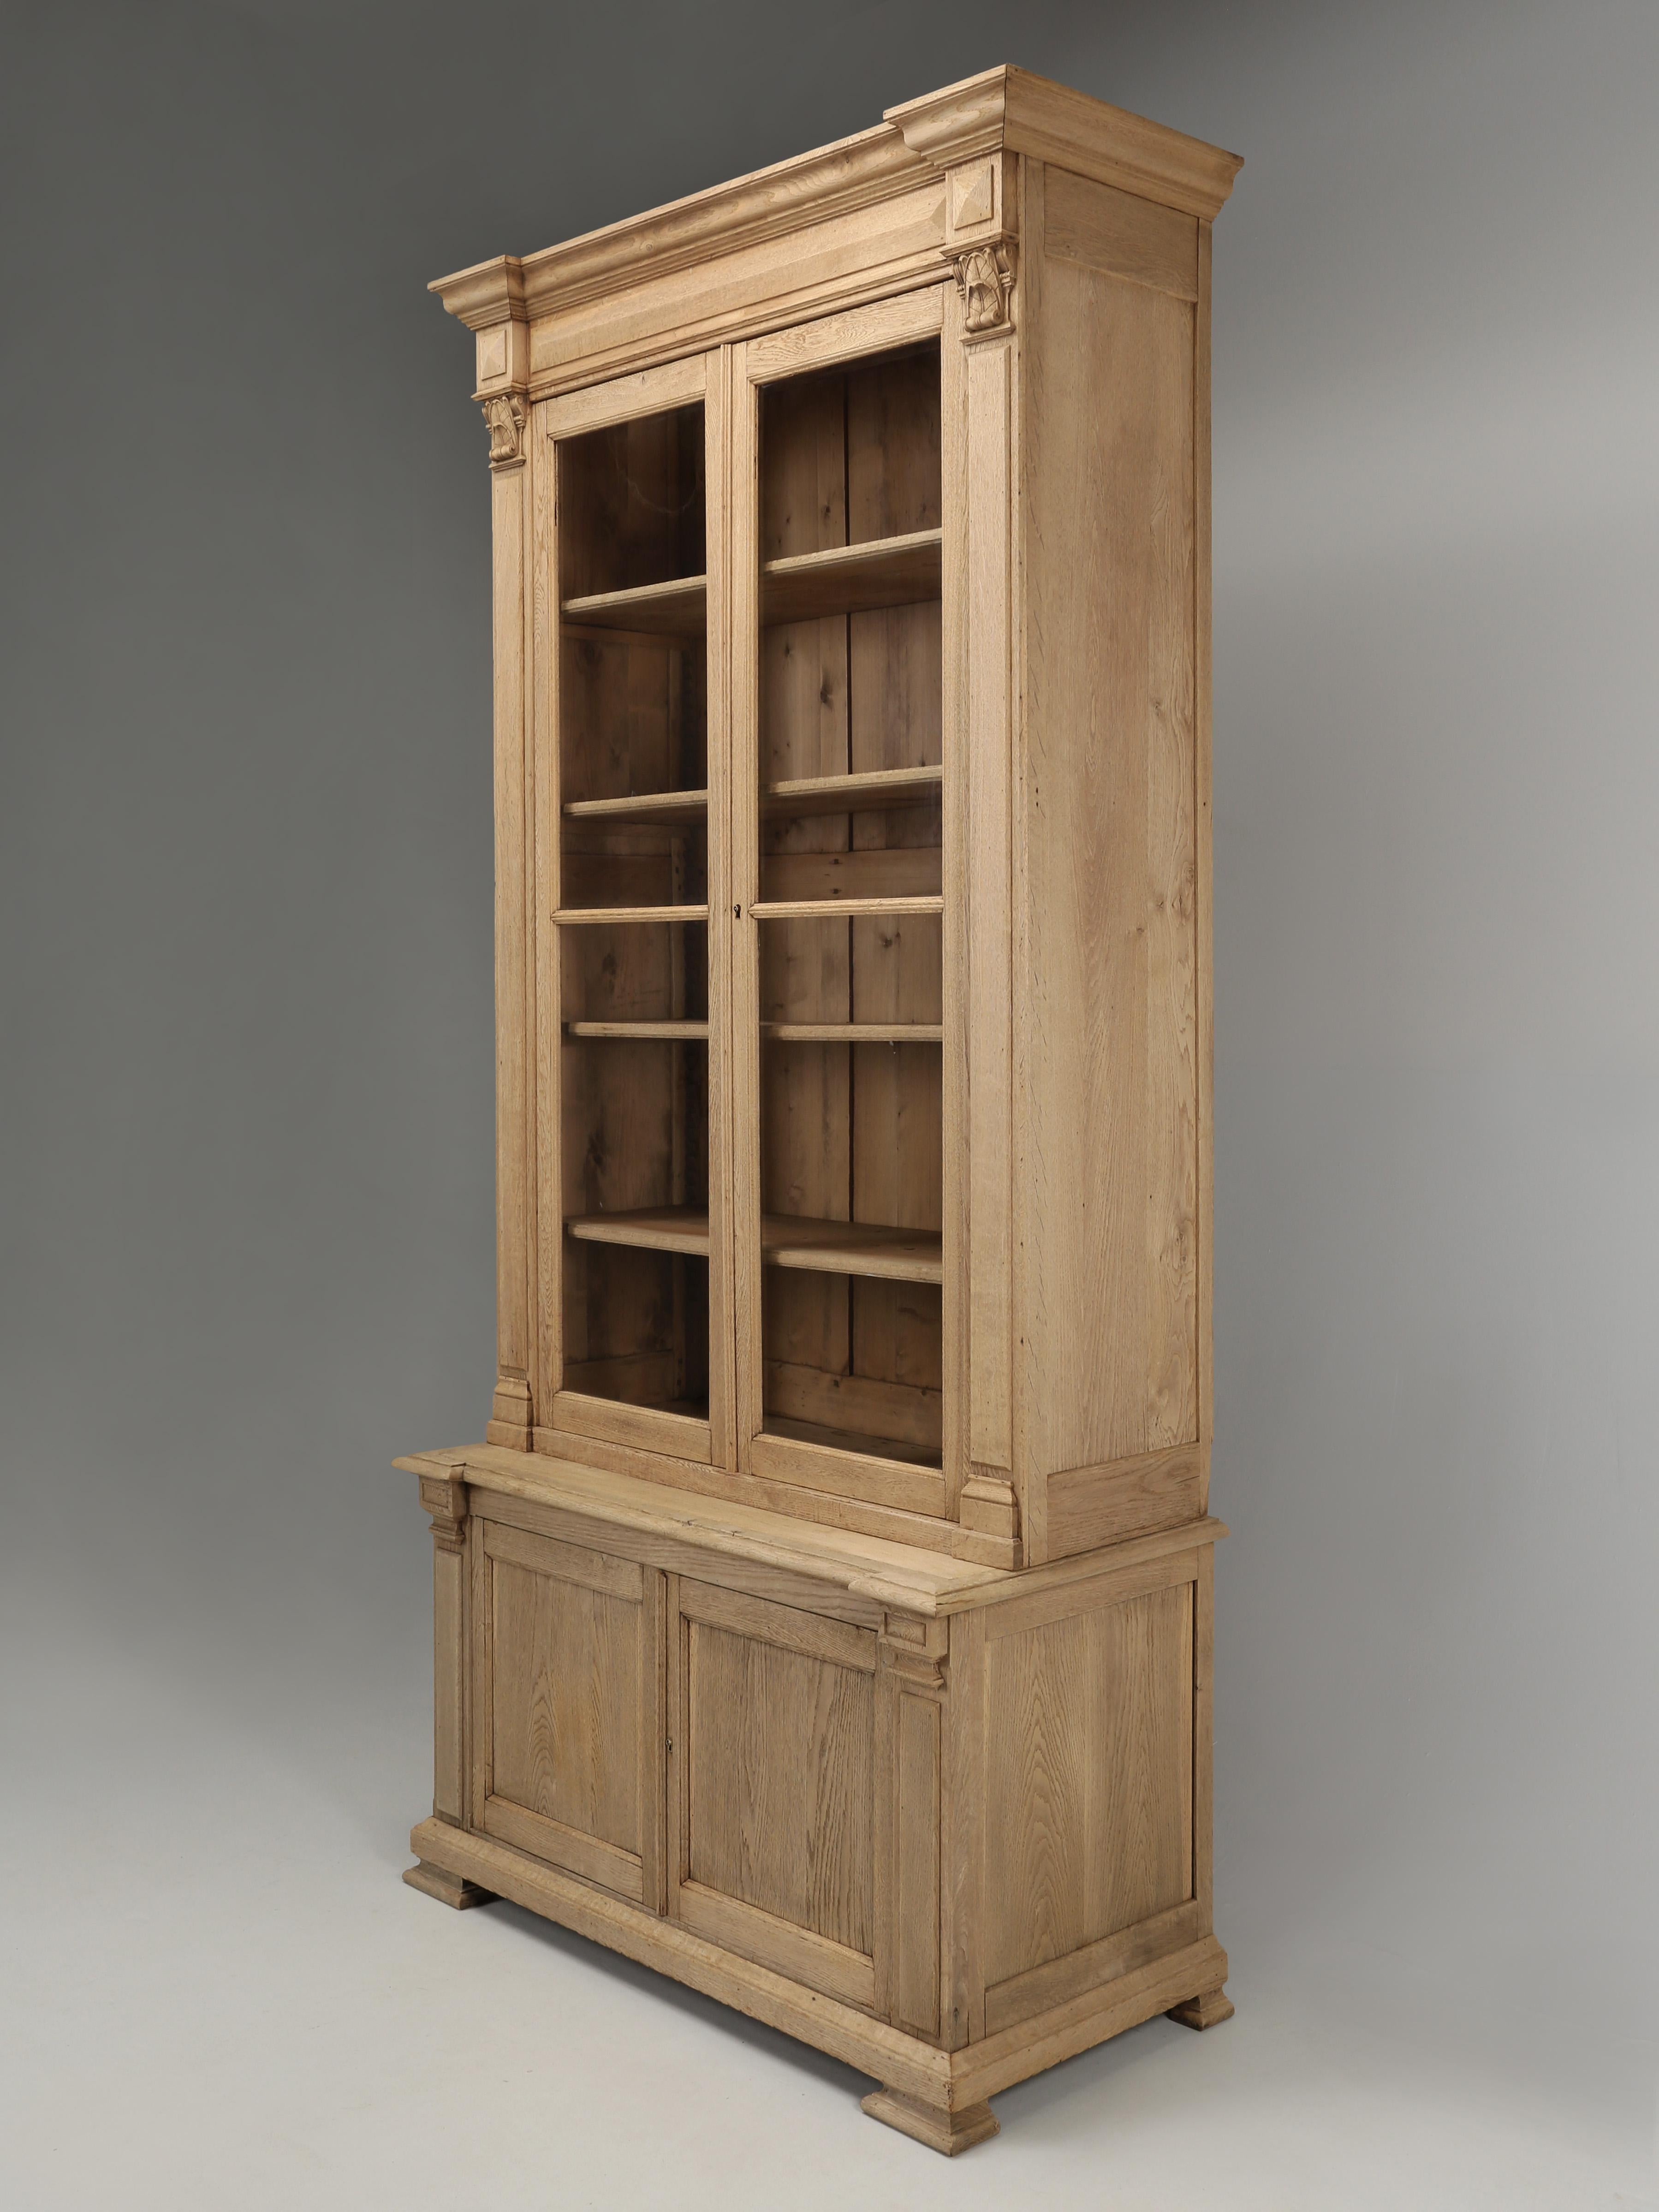 Magnificent antique French white oak bookcase, with 2-doors, both retaining their original wavy glass. We located this antique French bookcase, china cabinet, or display cabinet in the town of Joigny, which is located in the north-central part of